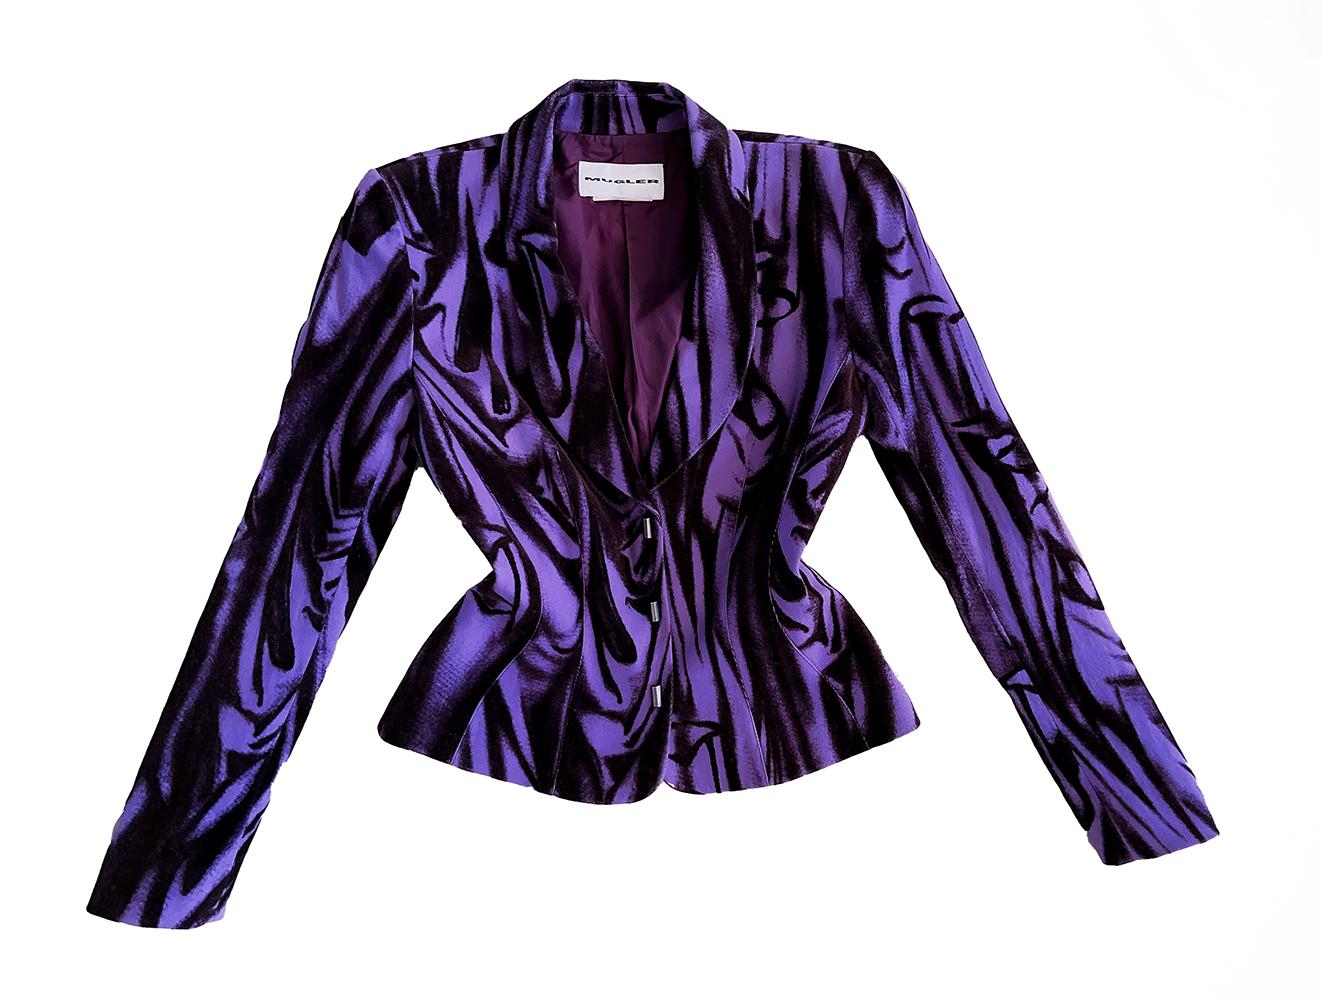 Thierry Mugler Rare Purple Illusion Jacket Drape Pattern In Excellent Condition For Sale In Berlin, BE